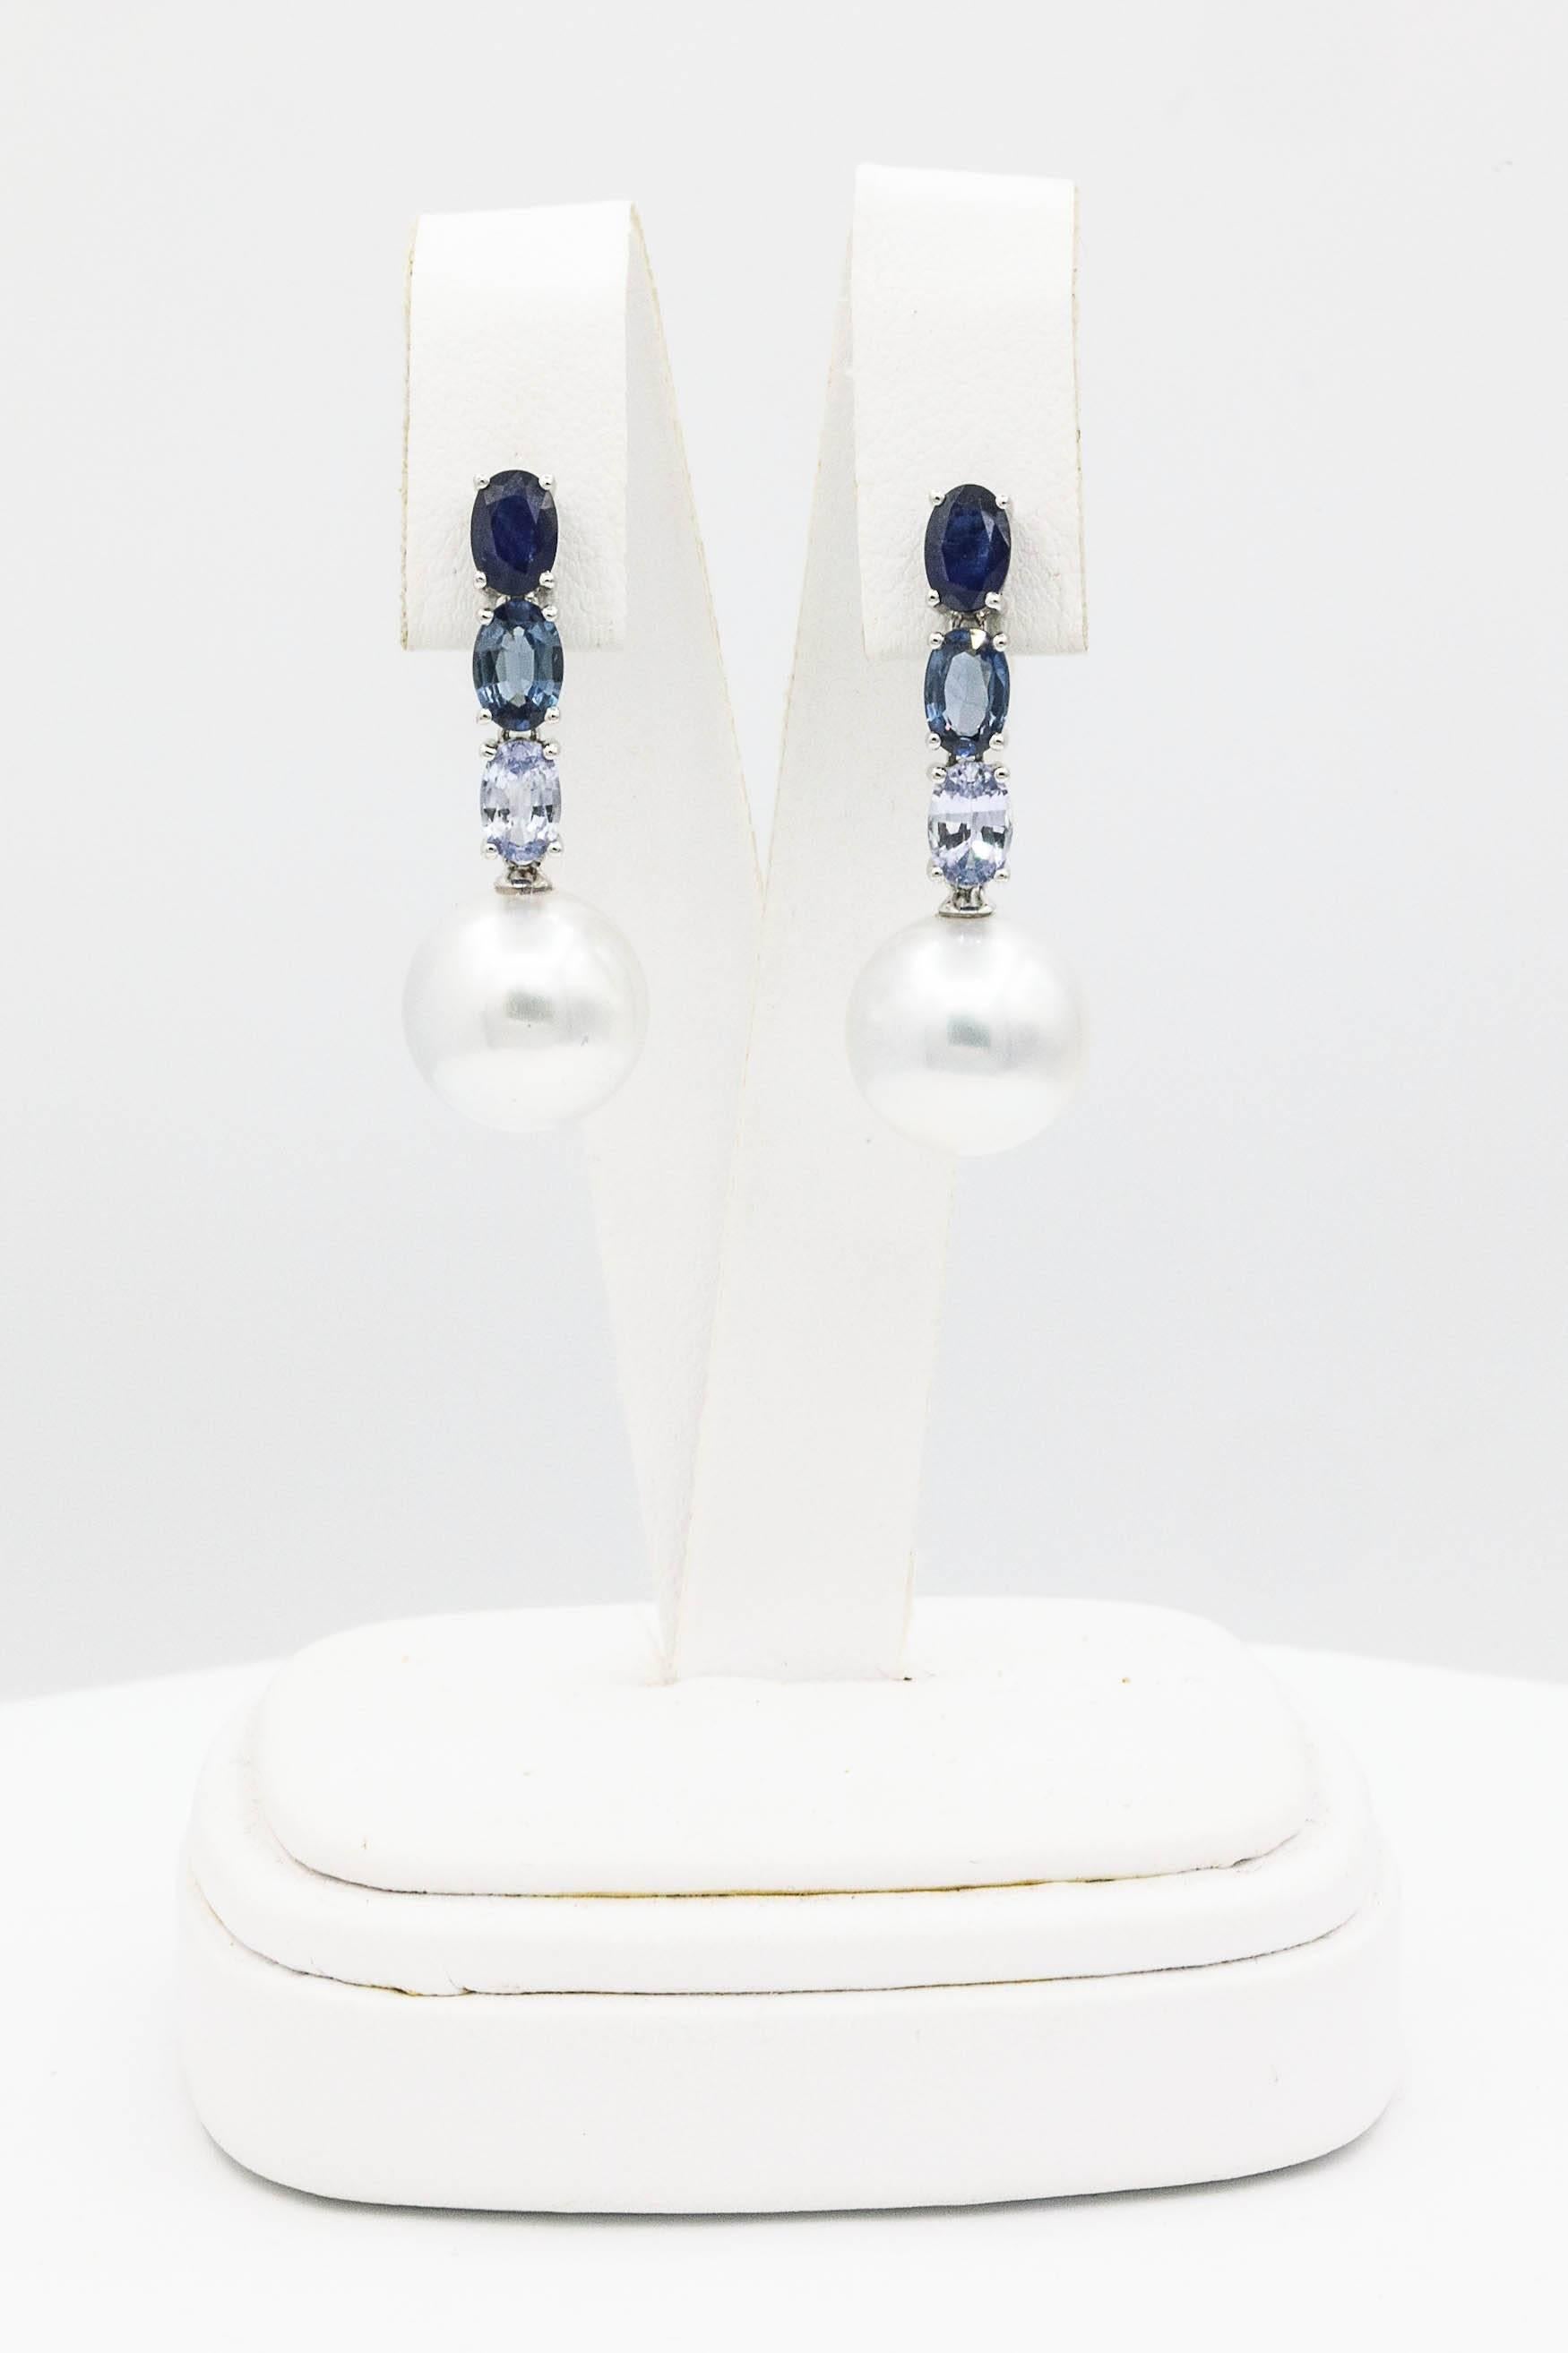 18K White gold drop earrings featuring 6 oval Sapphires weighing 3.00 carats and two 11-12 mm South Sea Pearls
Great Ombre Look!